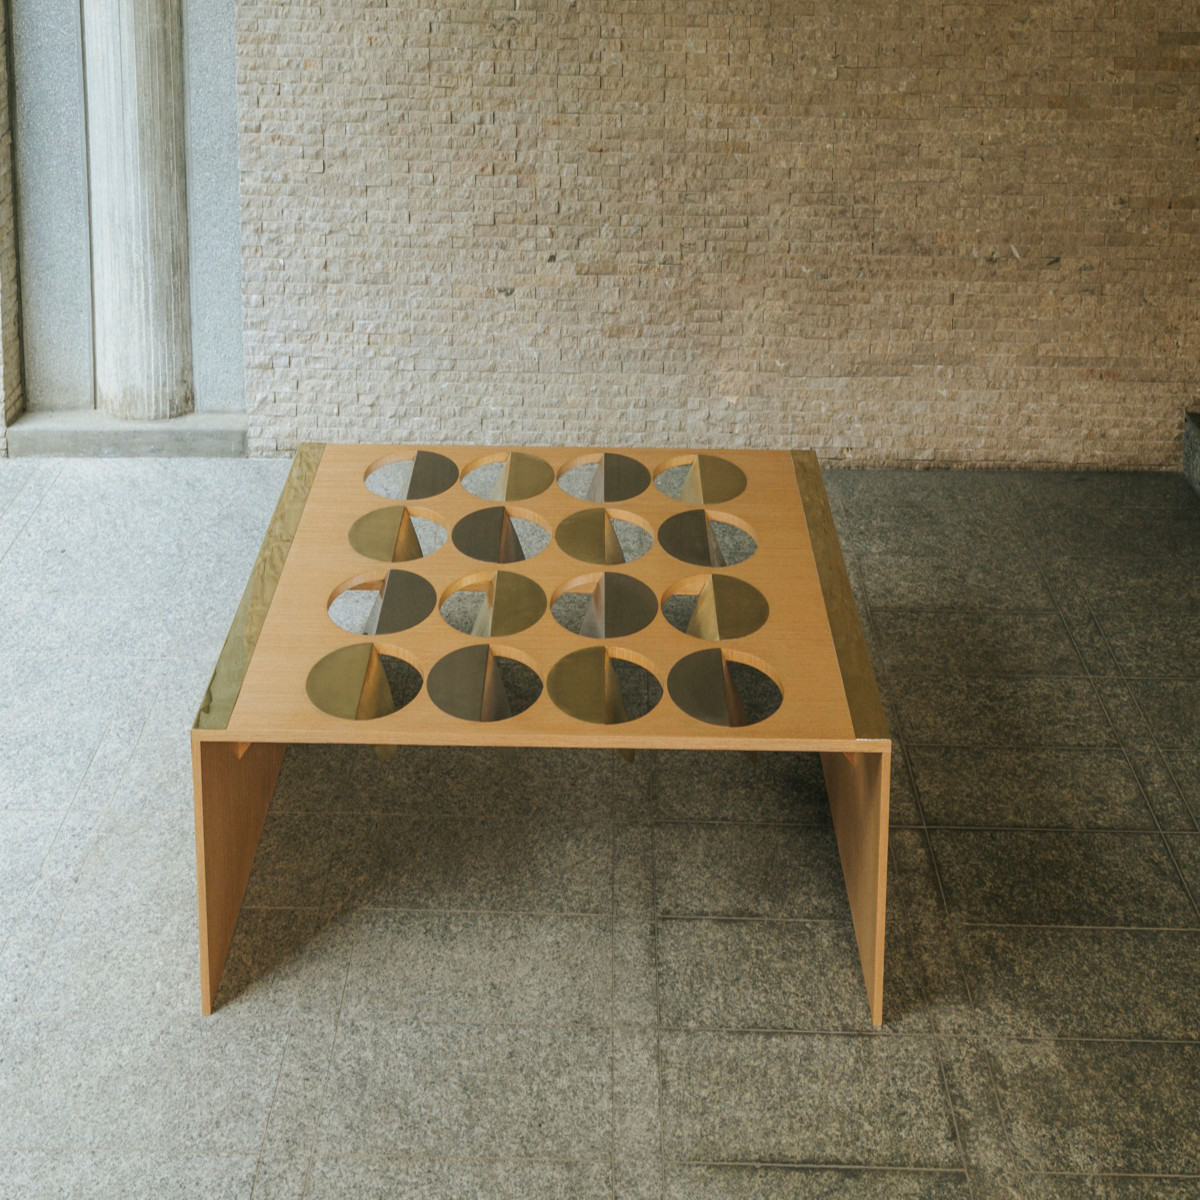 Moonland Table by Ana Volante